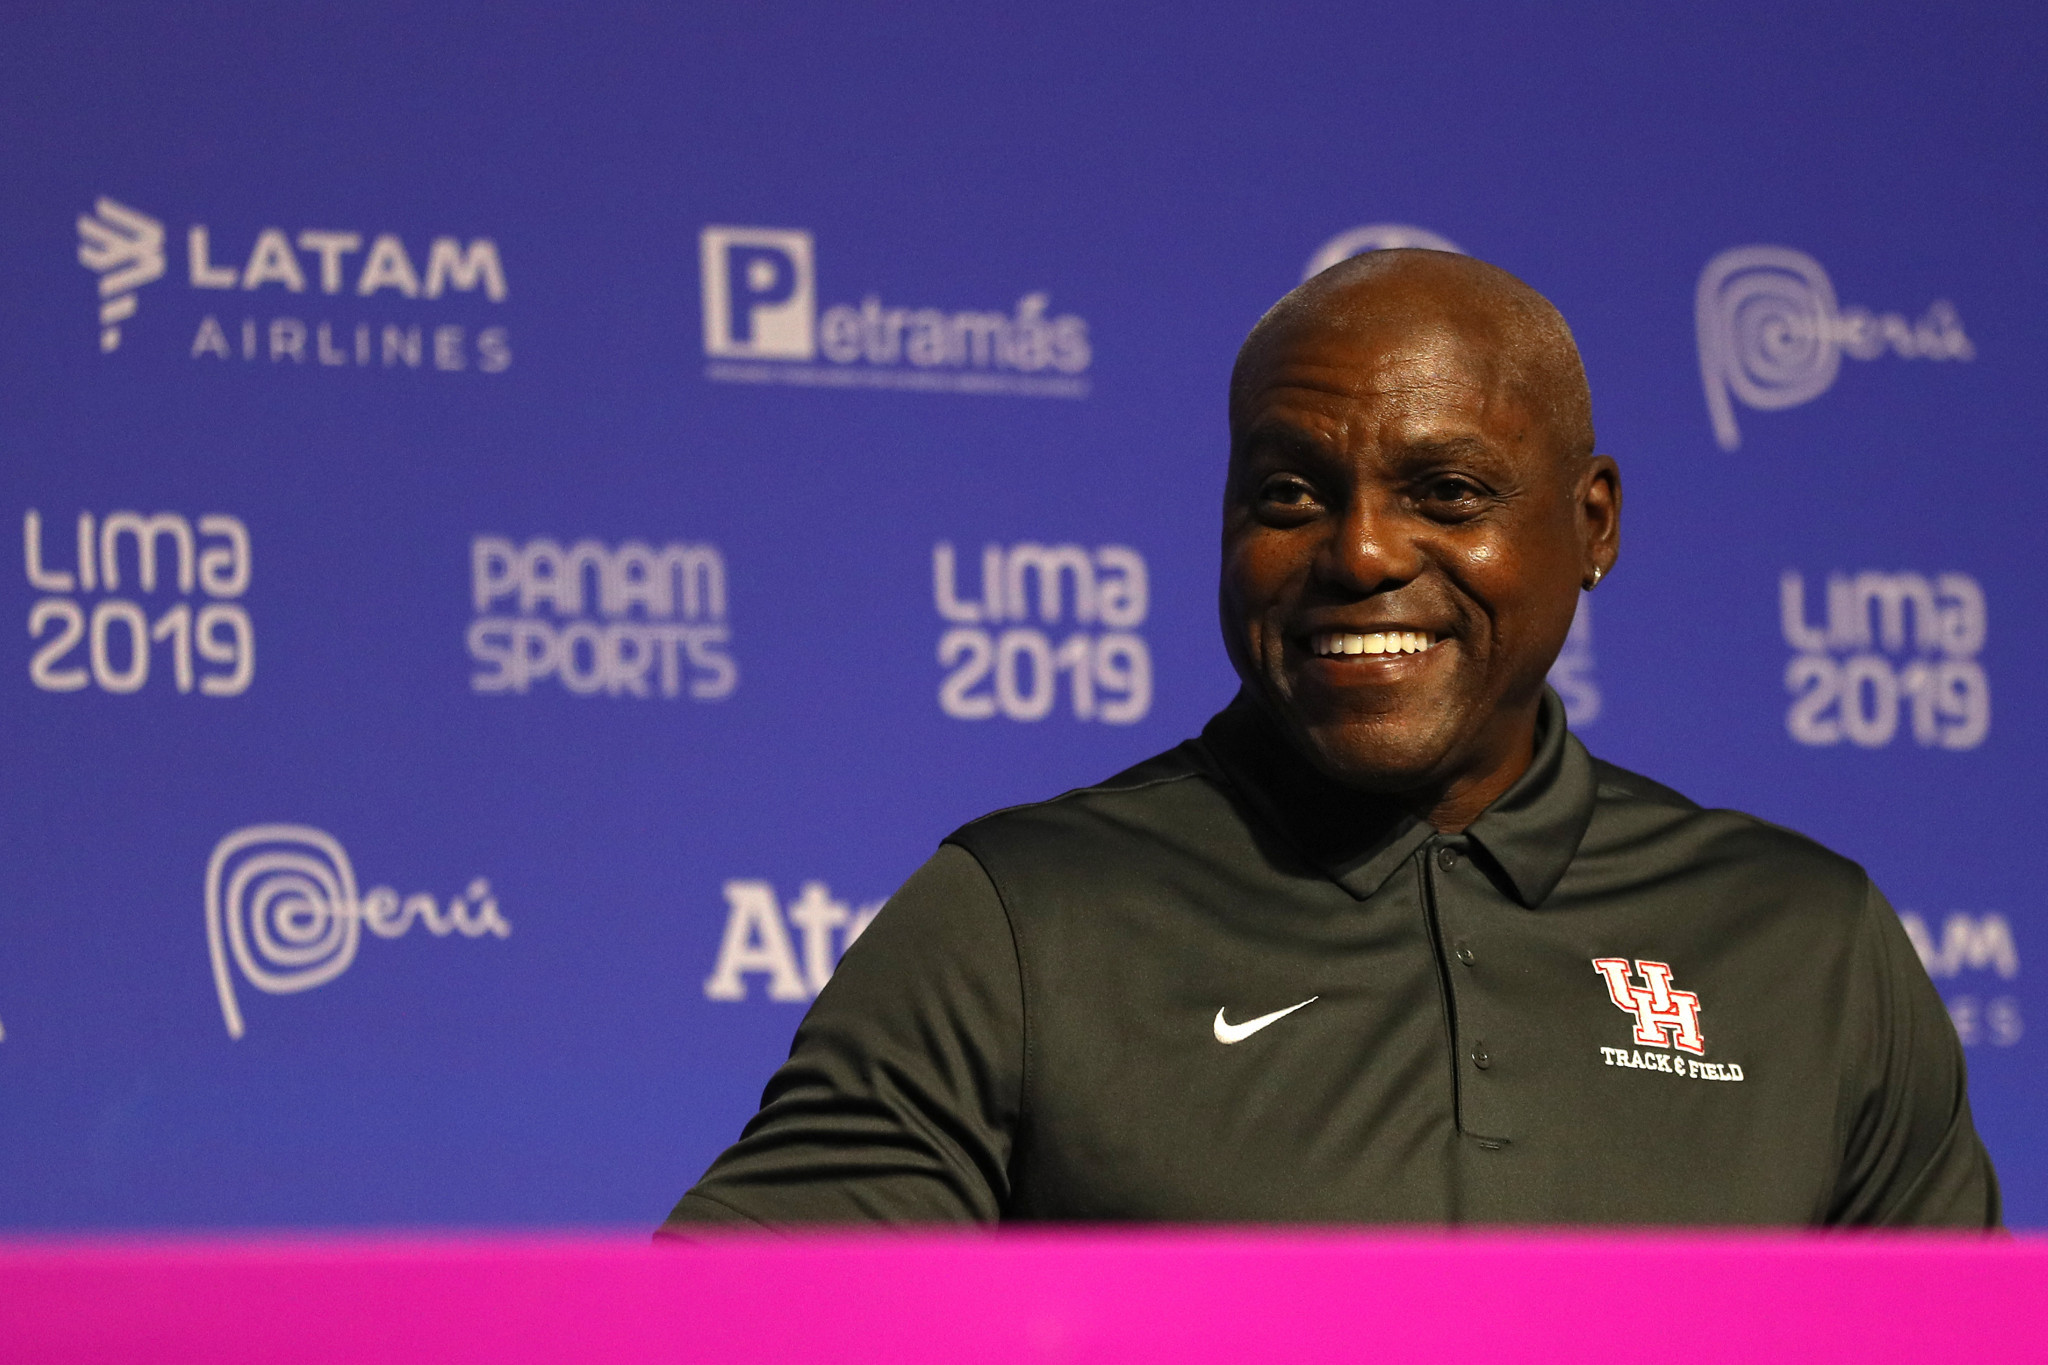 Carl Lewis expects Pan American Games to have "profound impact" on Peru